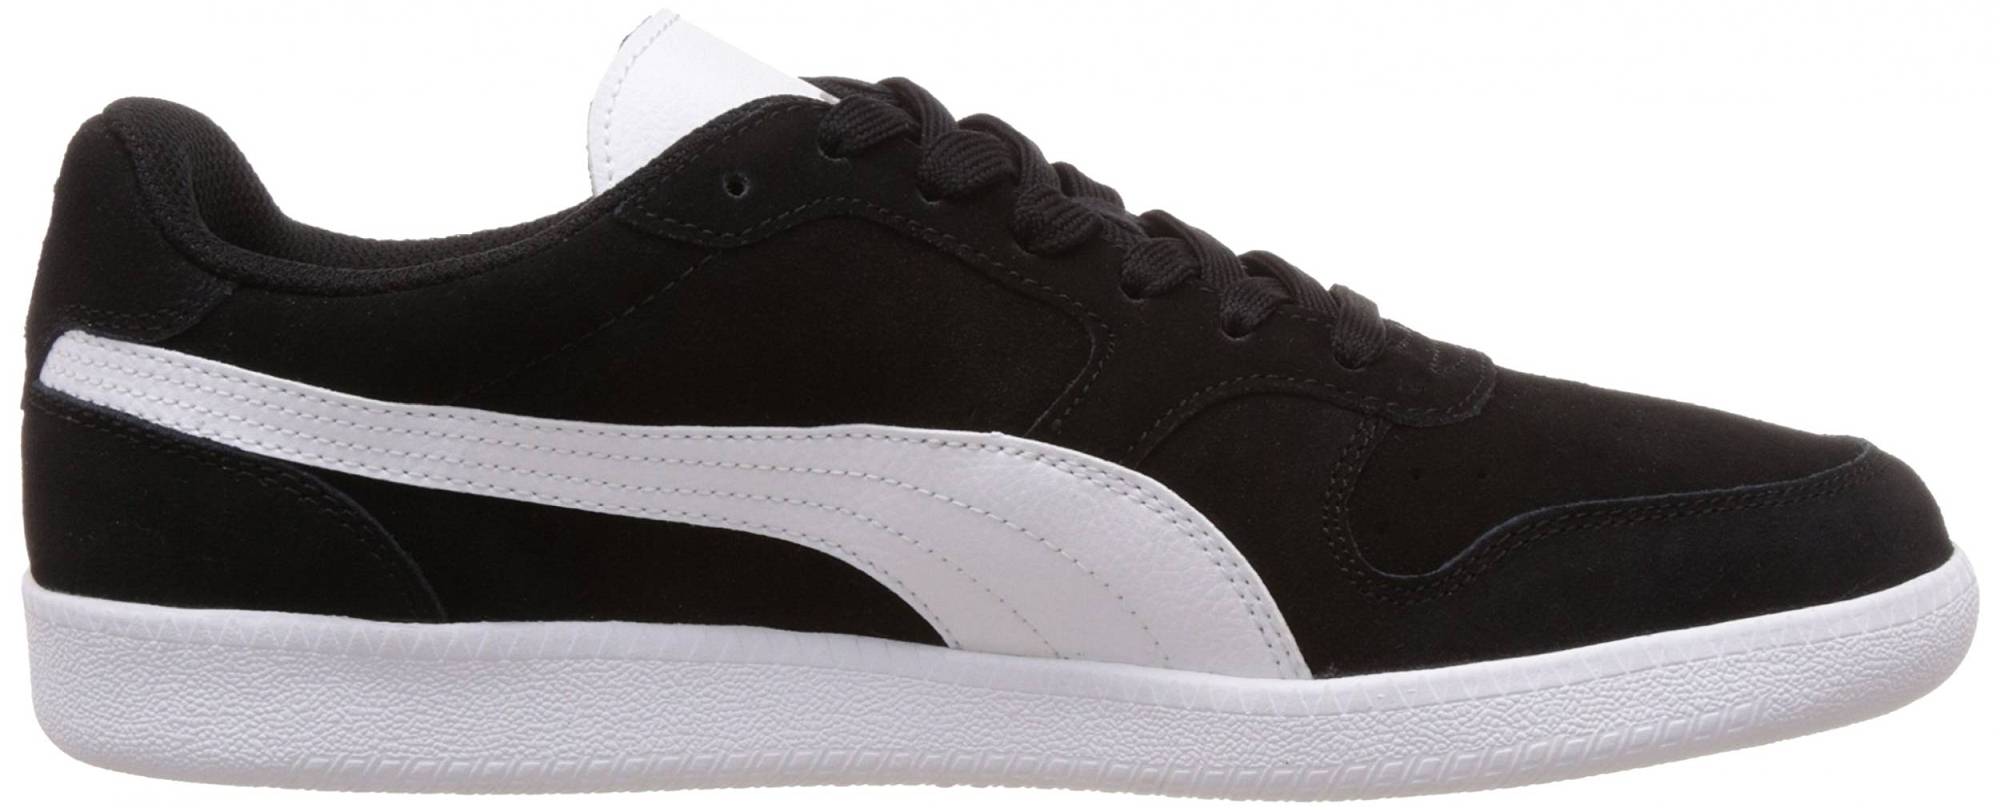 Puma Icra Trainer SD – Shoes Reviews & Reasons To Buy